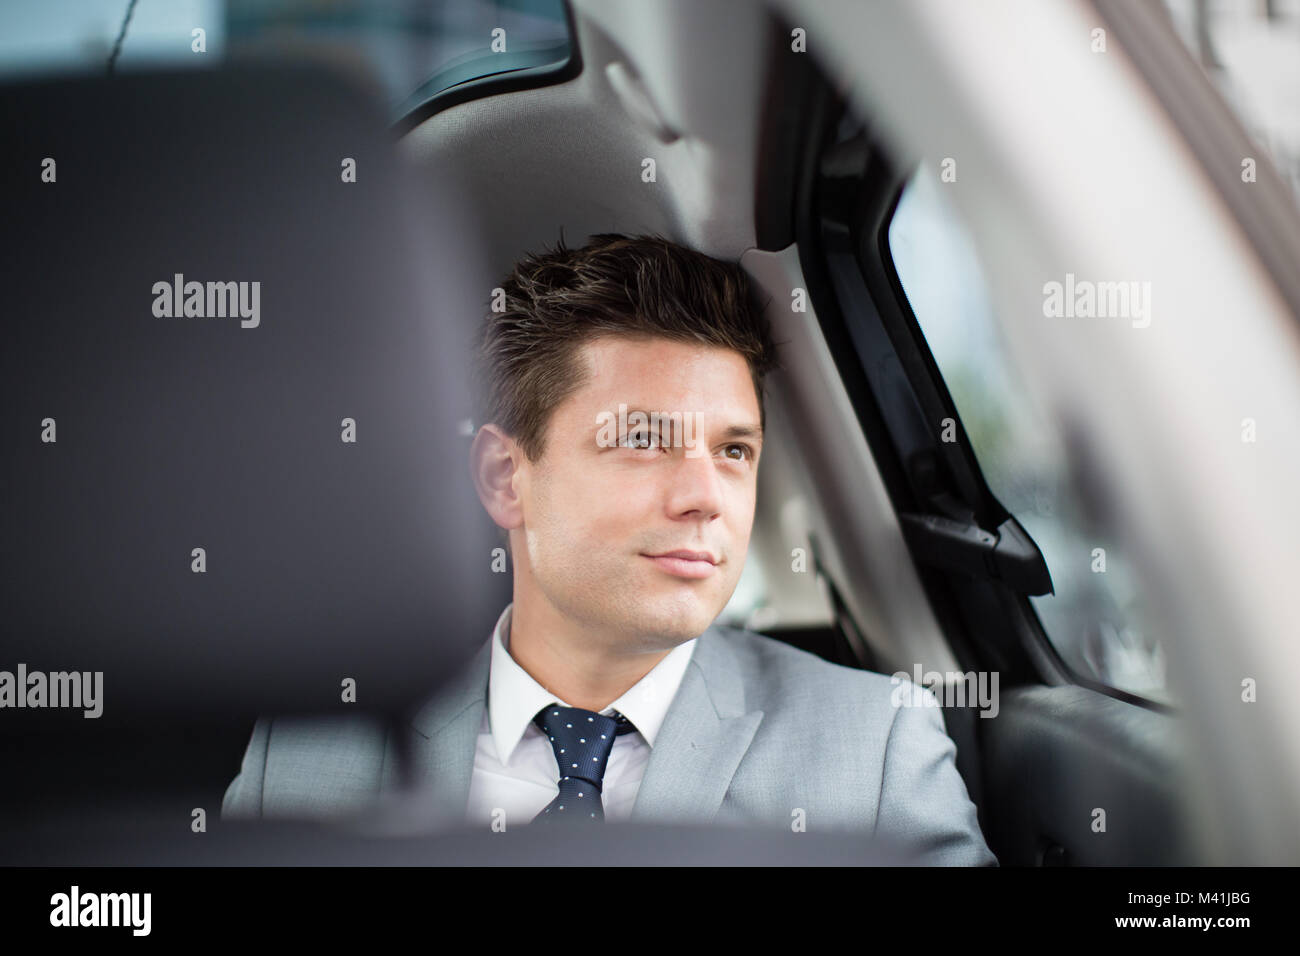 Businessman looking out of window of taxi cab Stock Photo